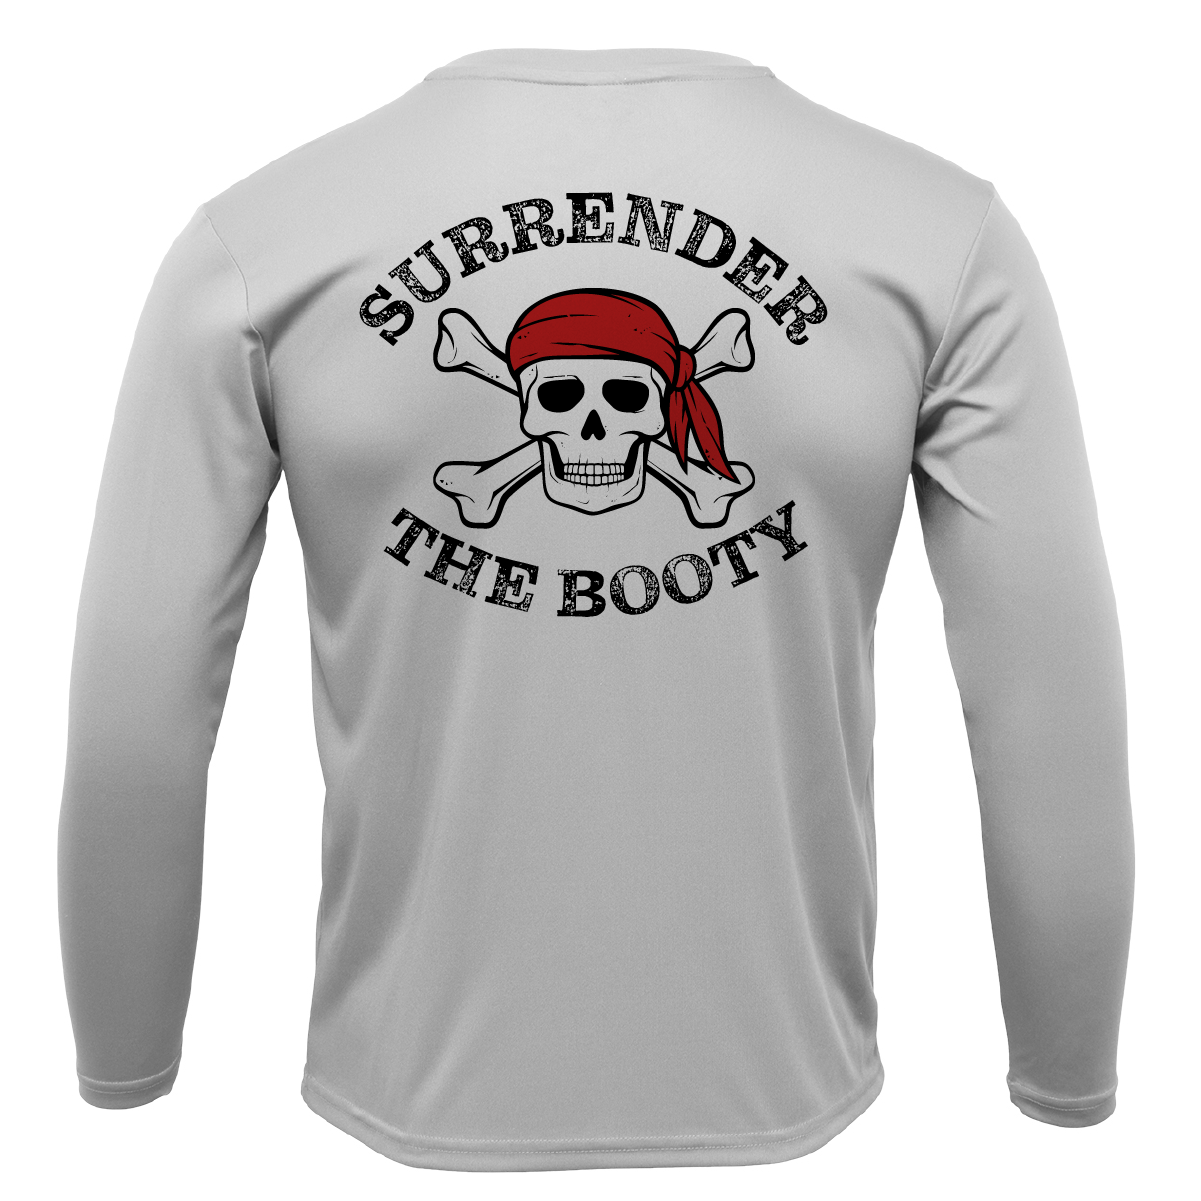 Texas Freshwater Born "Surrender The Booty" Boy's Long Sleeve UPF 50+ Dry-Fit Shirt